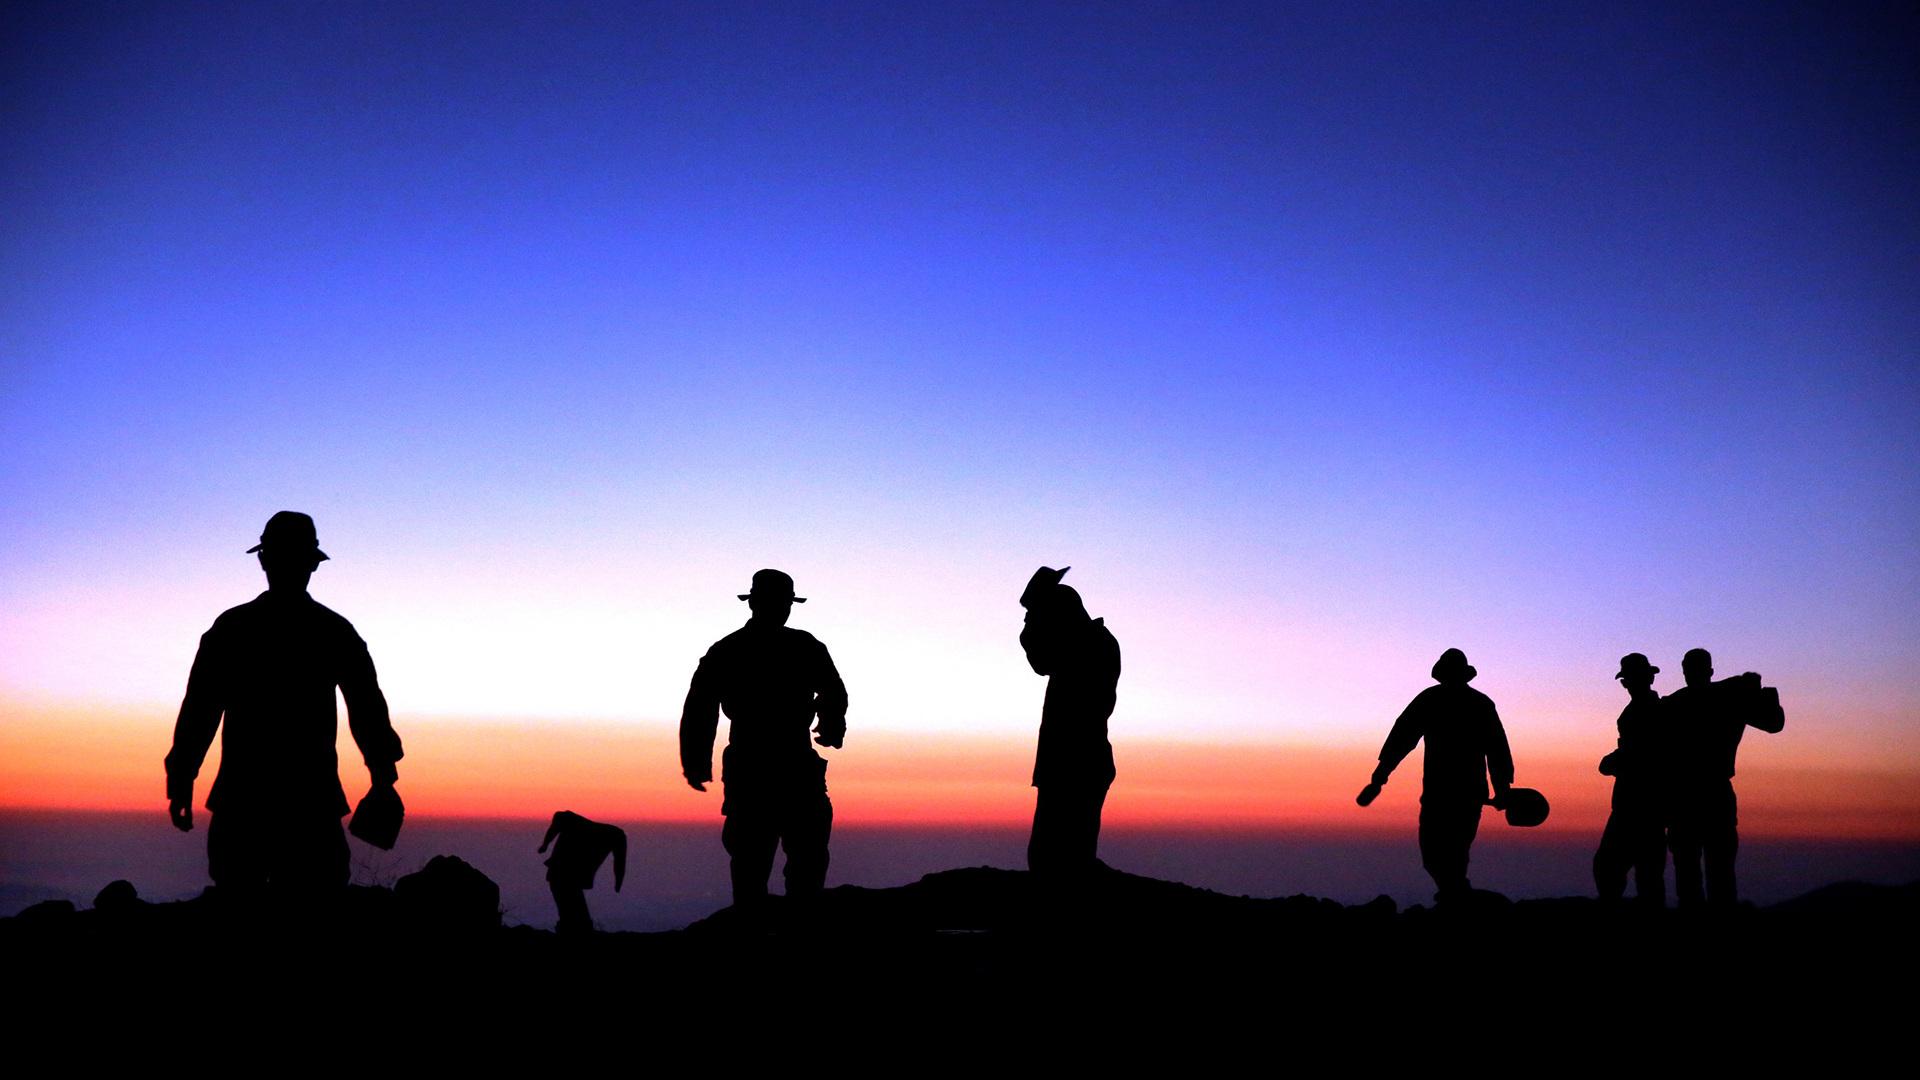 soldiers, Silhouette, Sunset, Military Wallpaper